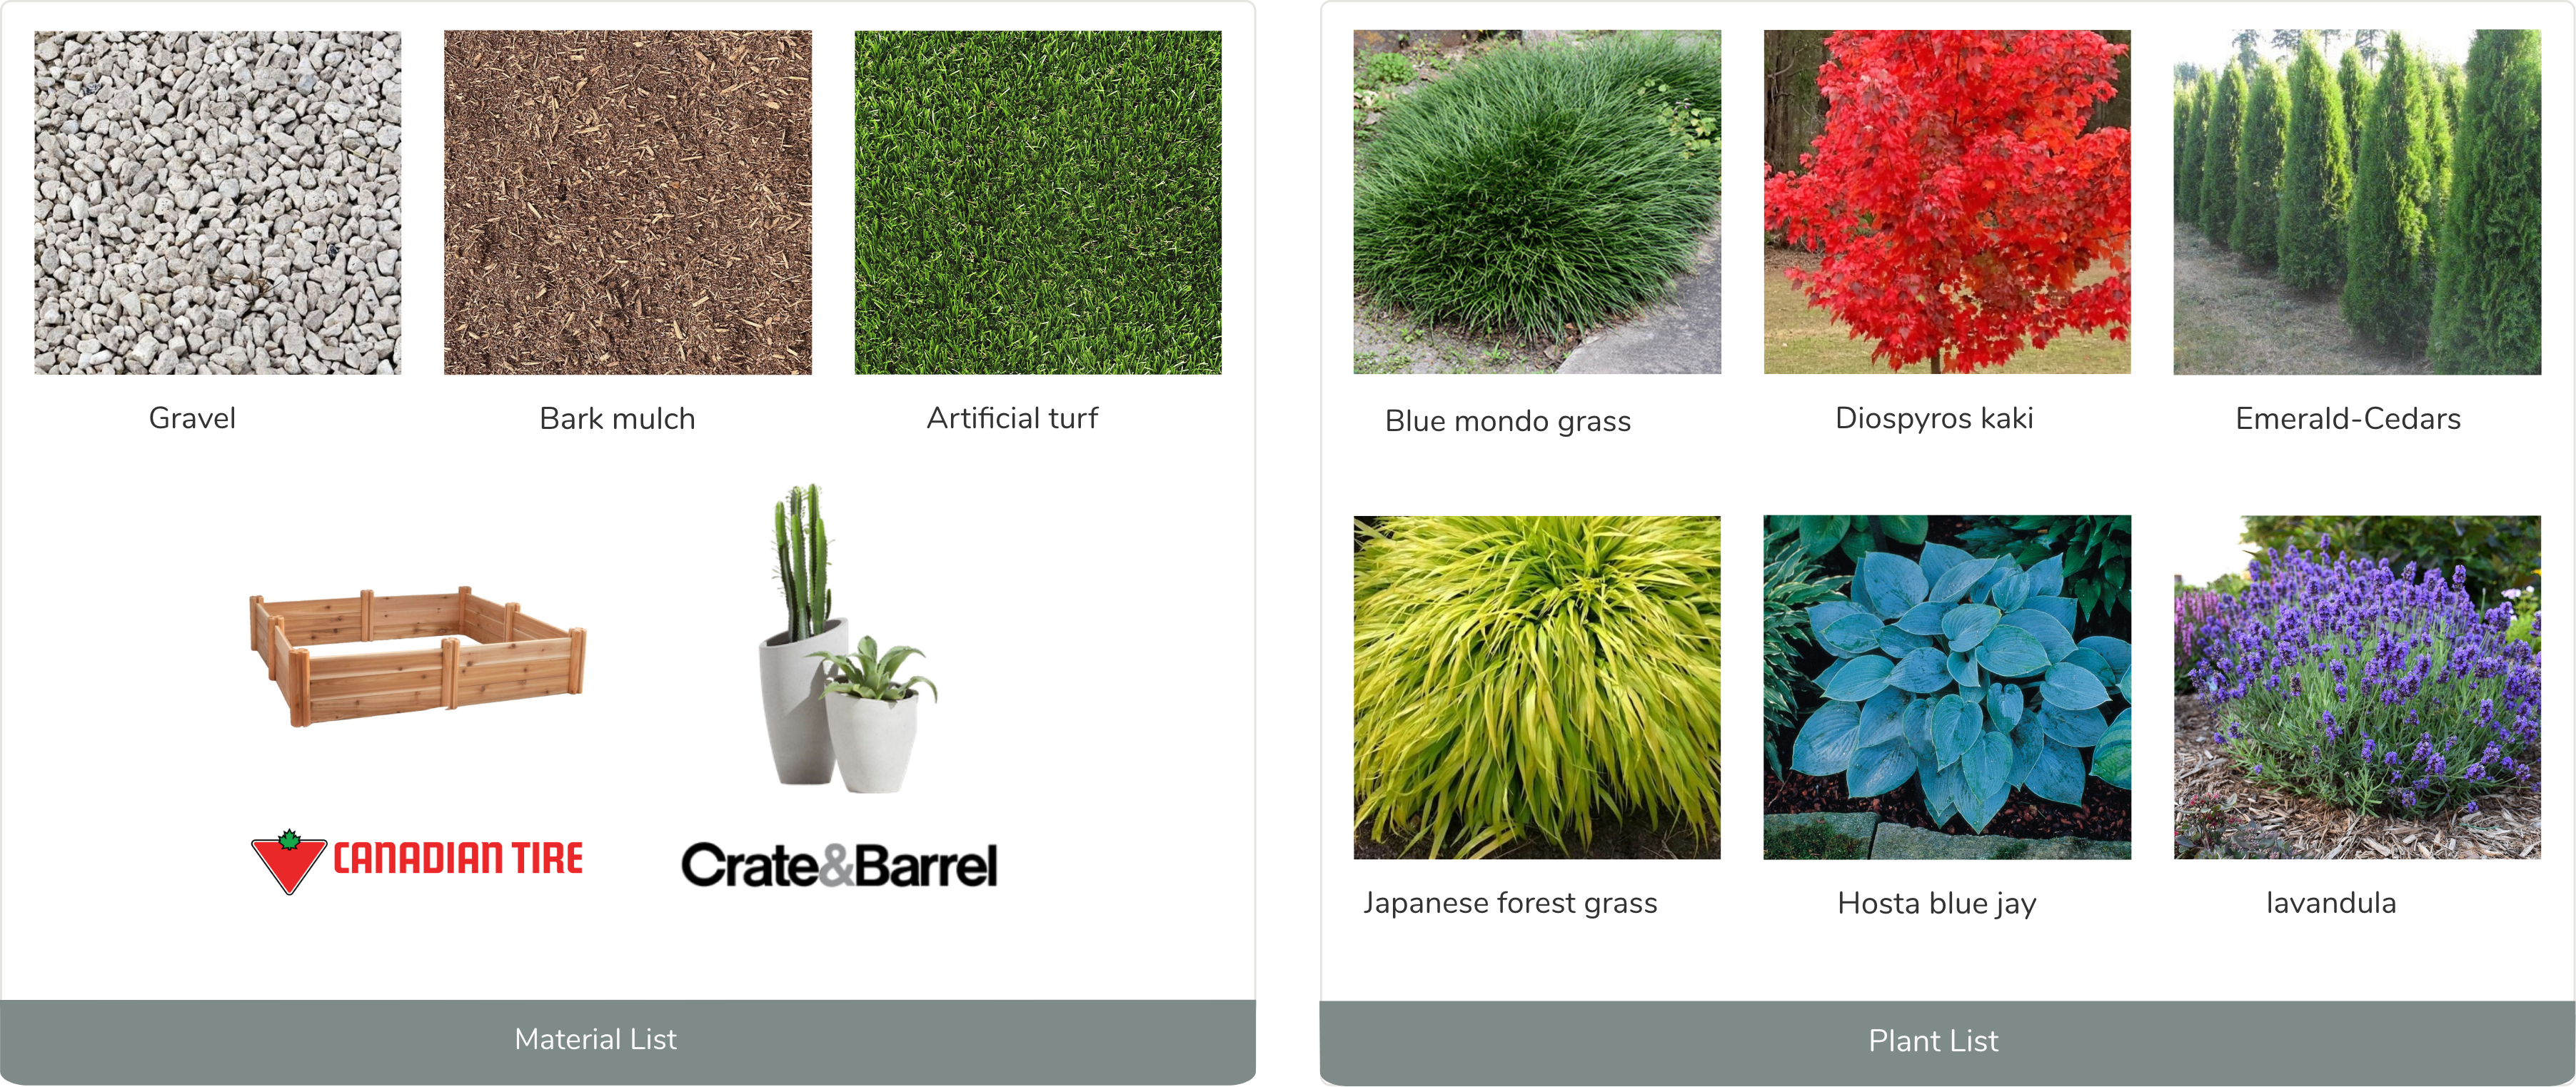 Composite image showing samples of landscaping materials like gravel and bark mulch, alongside a variety of plants including Blue mondo grass and Lavandula.